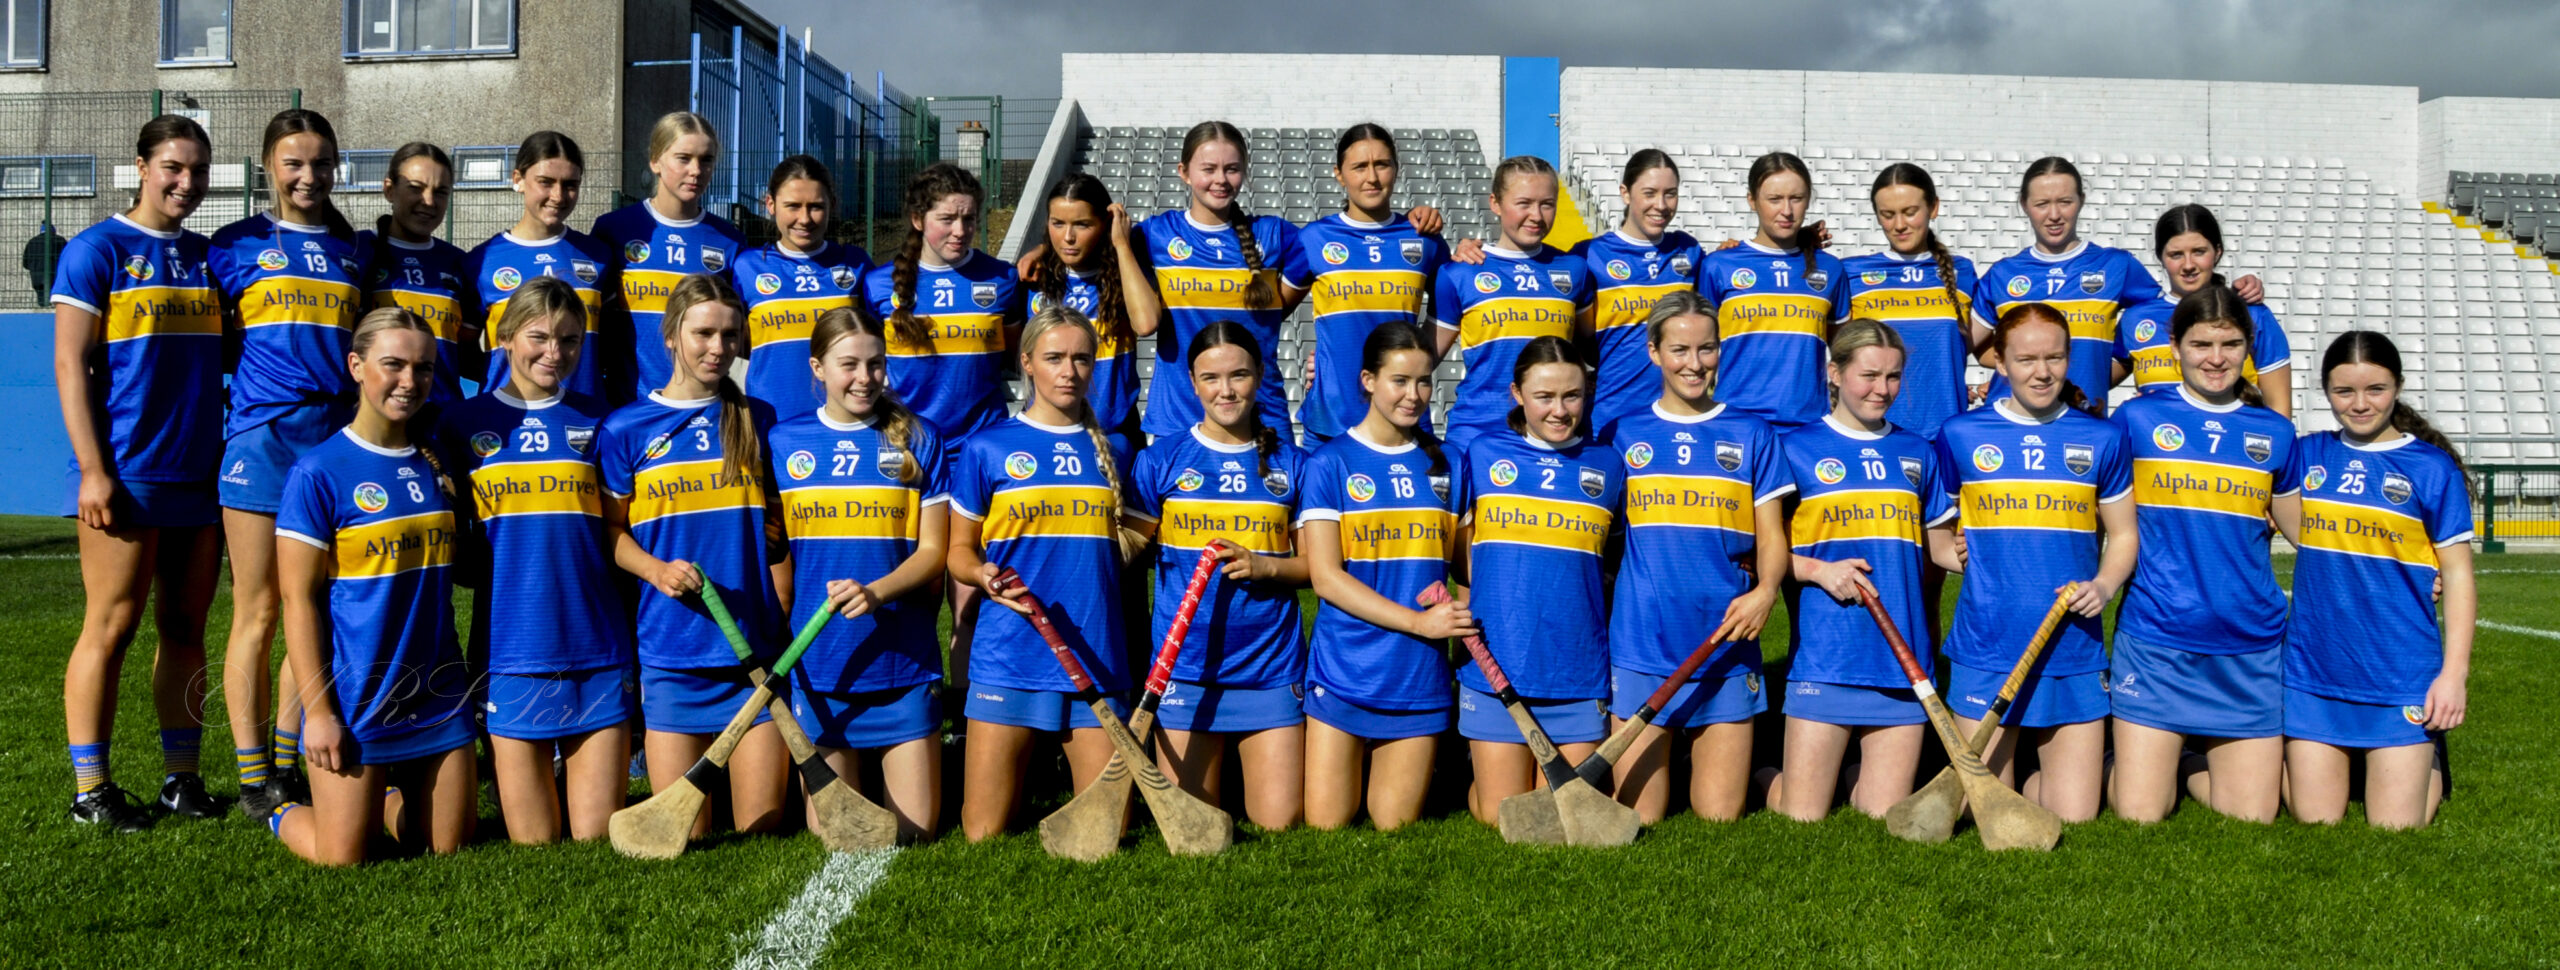 Tipperary Minors come away with a 5 point win over Waterford